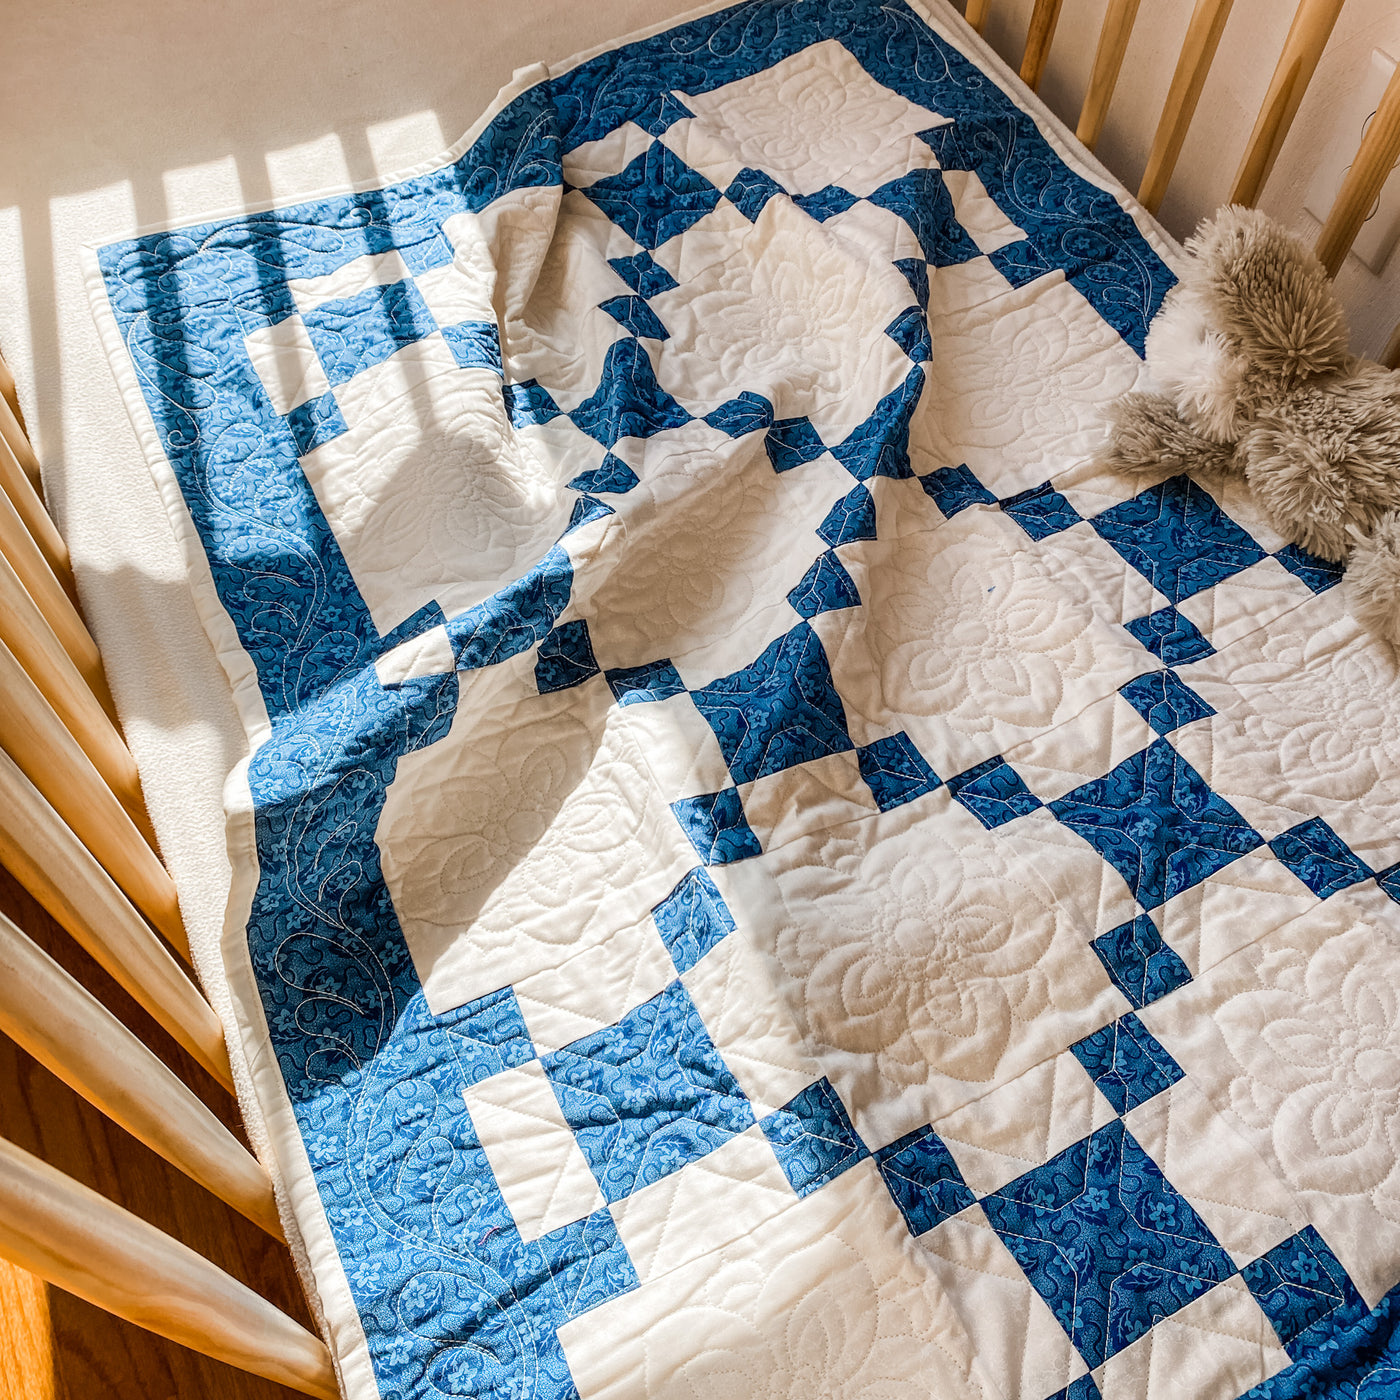  a handmade, heirloom, patchwork of indigo/blue nine patch with white background fabric, natural color backing, 100% cotton batting, Floral top quilting in the white centers, X's in the 9 patch squares, and feathers along the borders, machine top stitched binding, on this crib size quilt